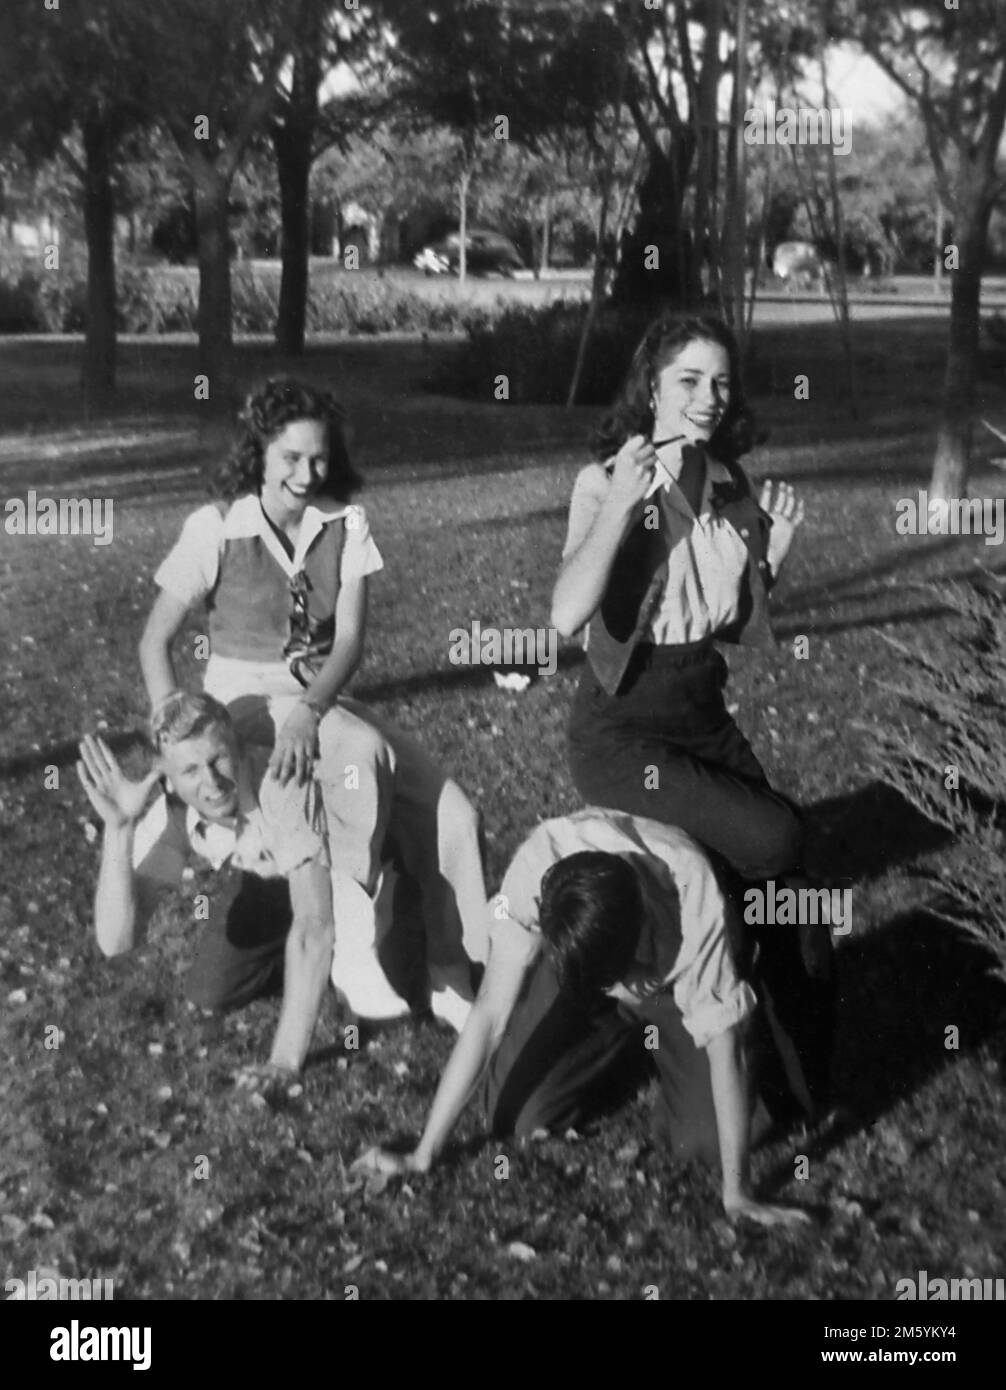 High school age couples have fun together outside, ca. 1948. Stock Photo